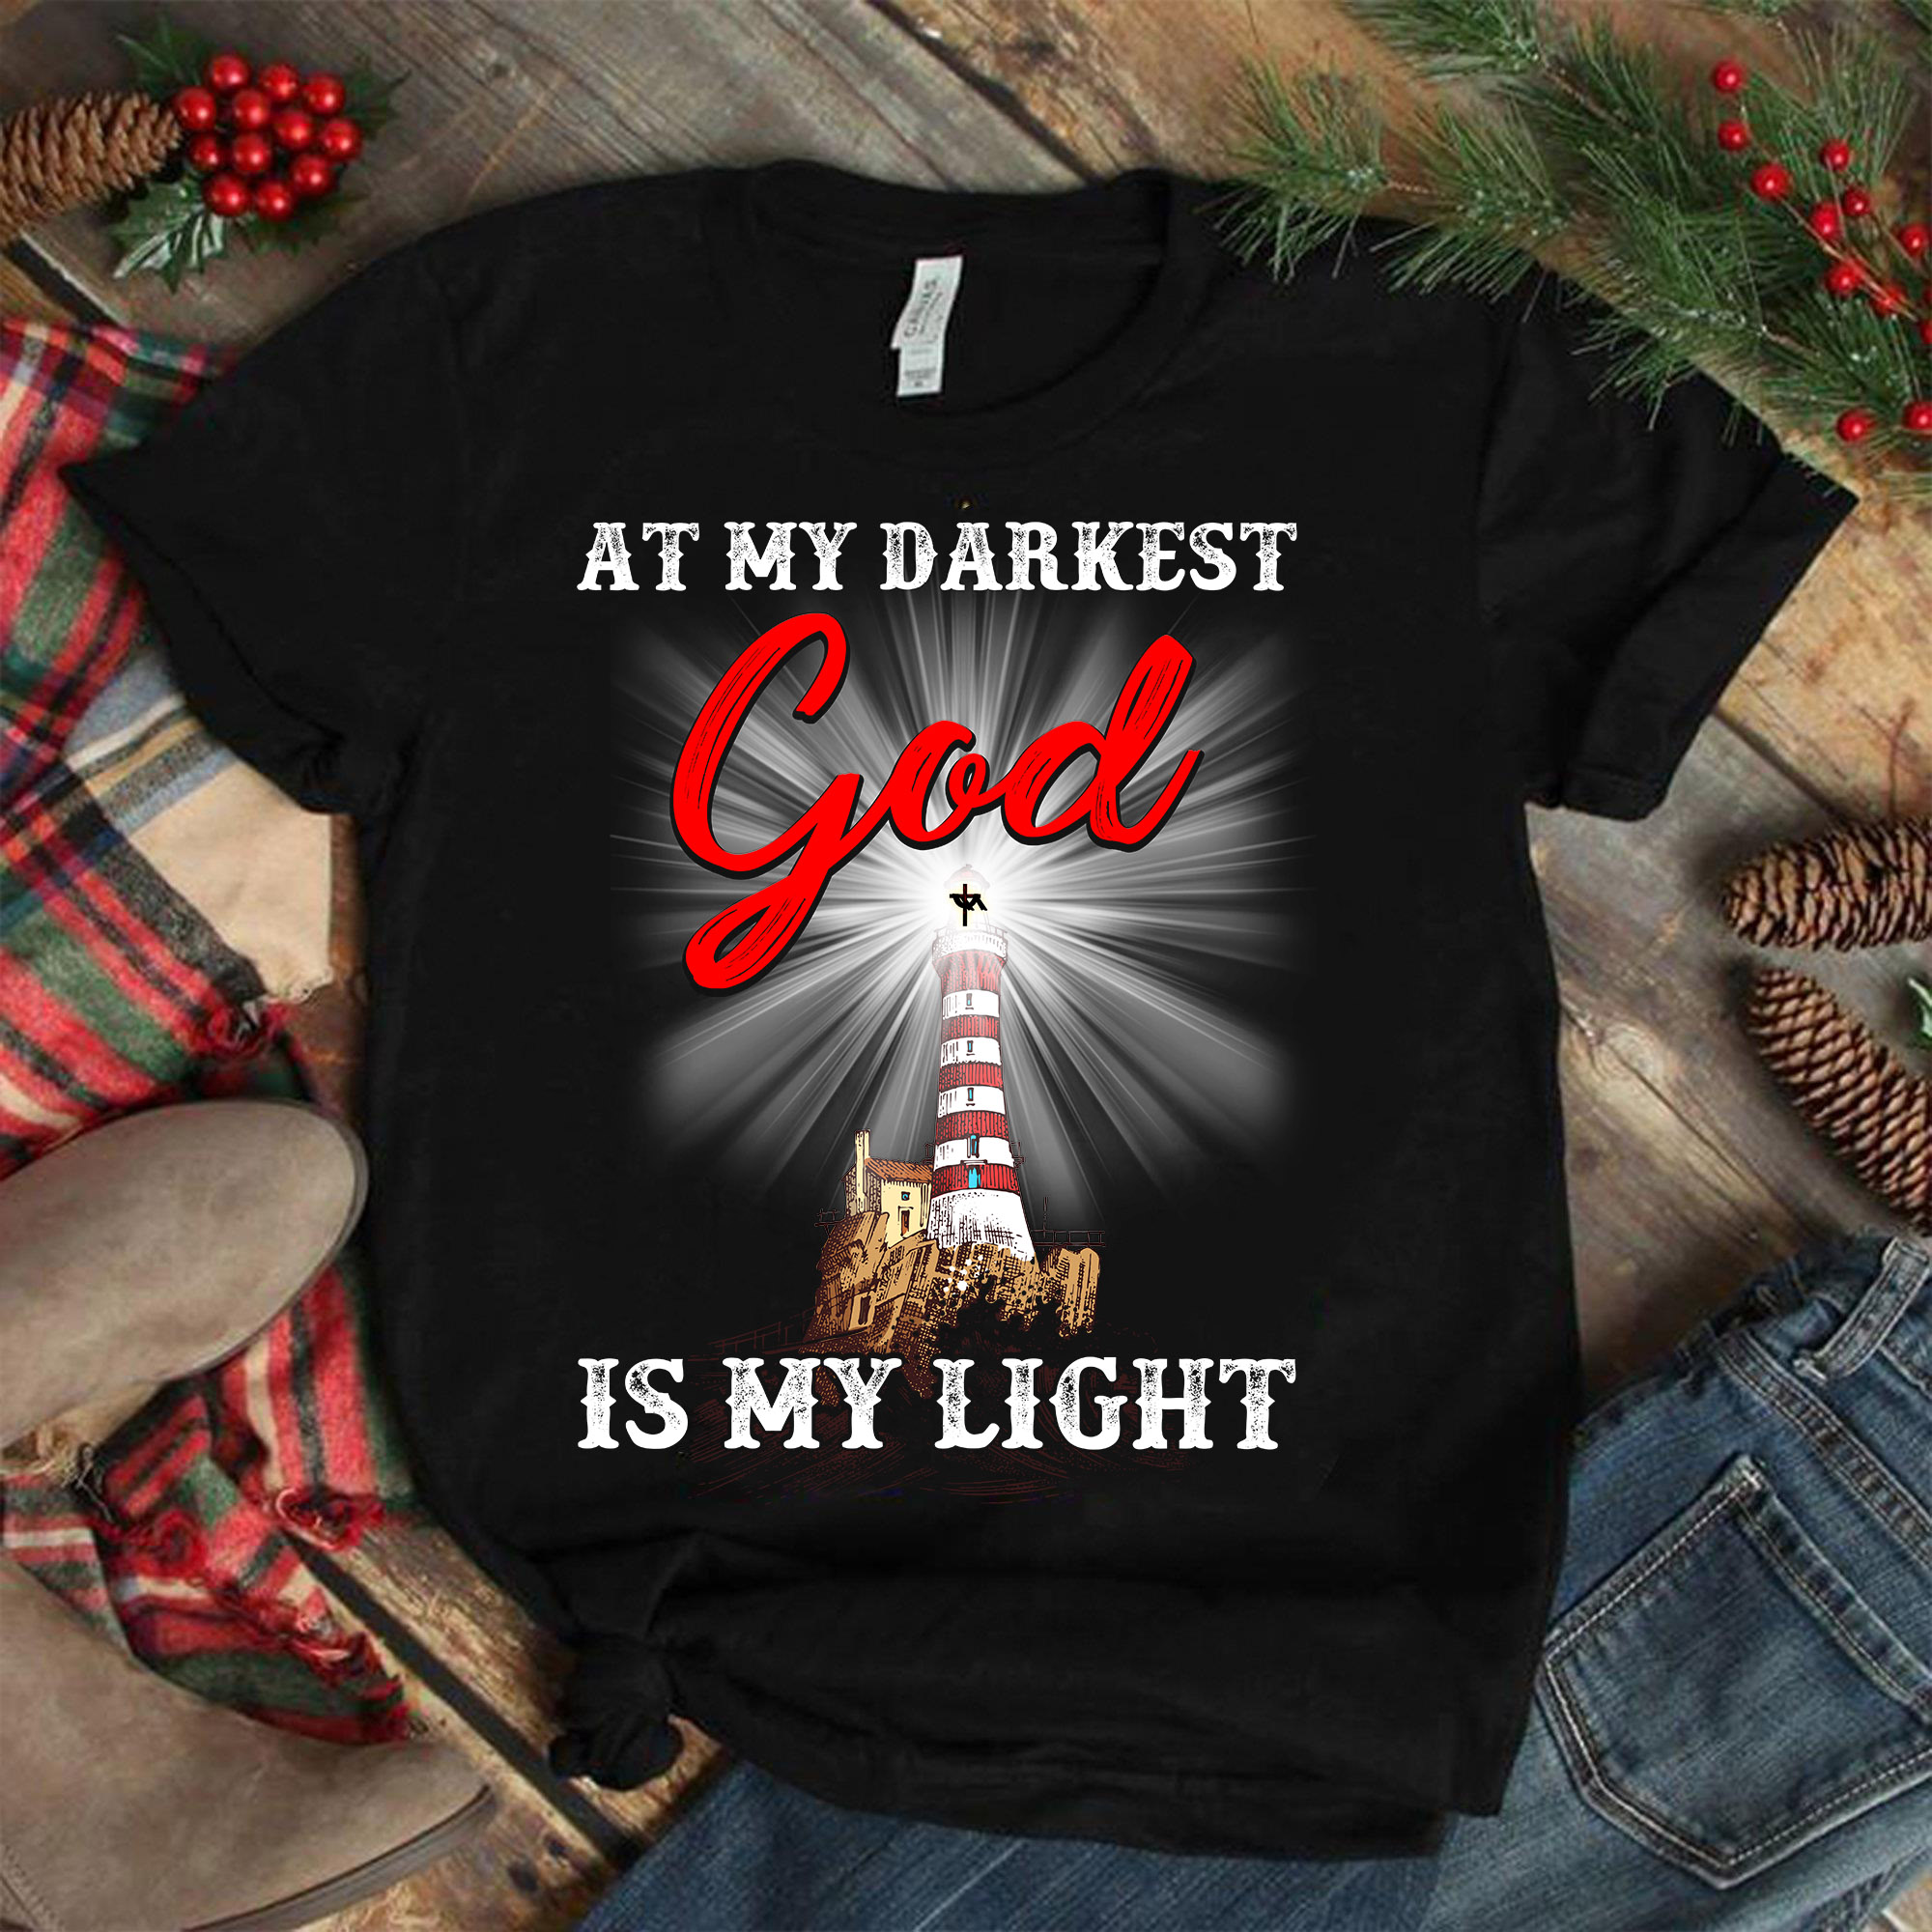 At my darkness god is my light